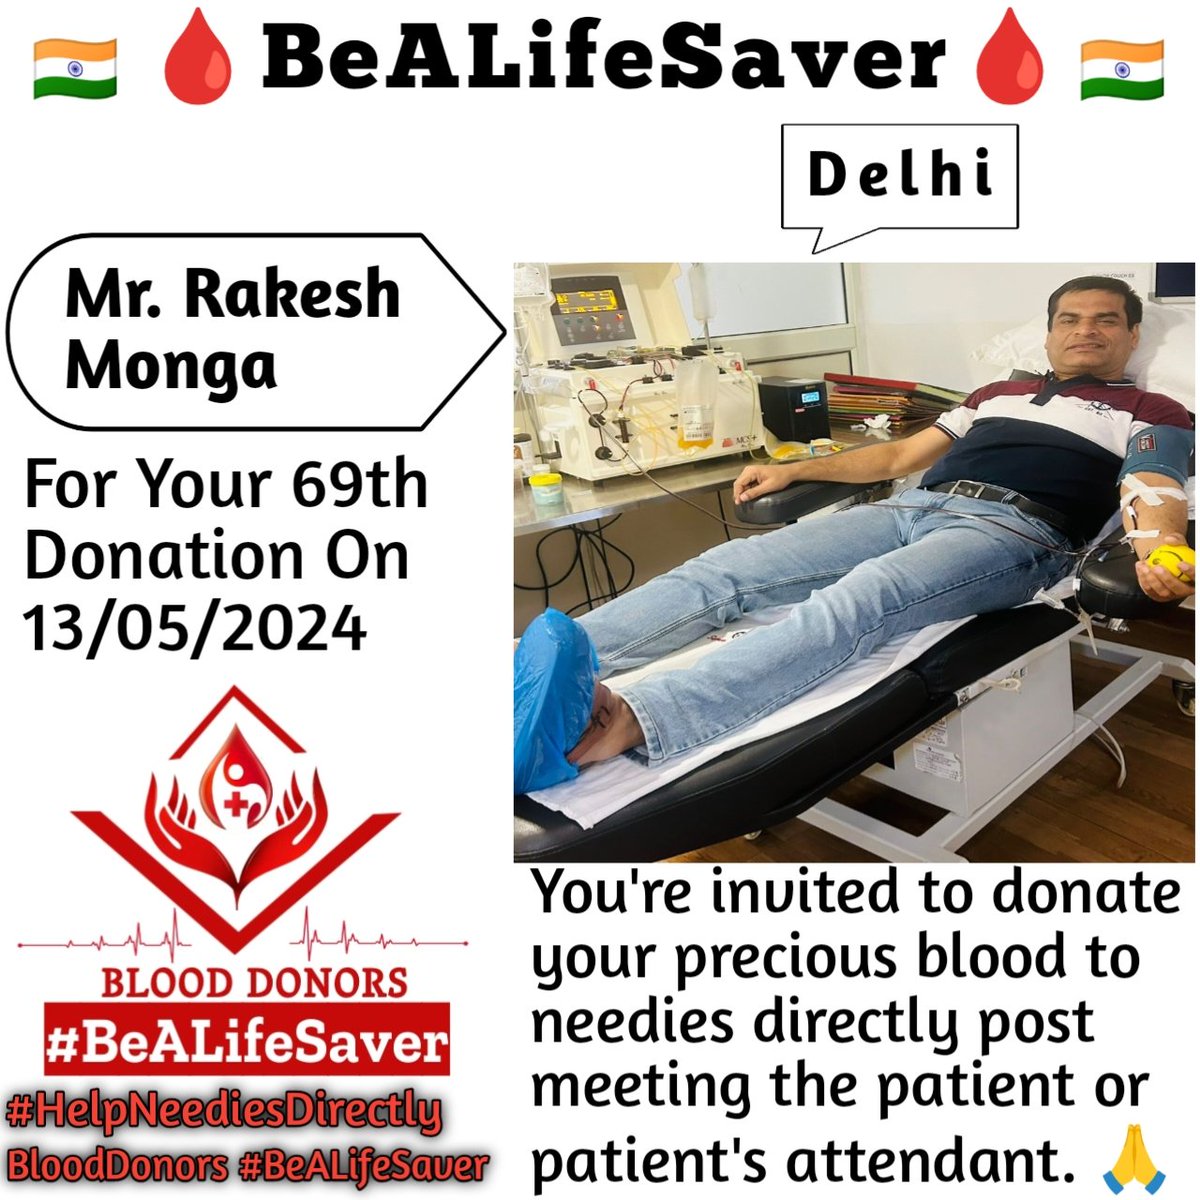 🙏 Congrats For 69th Blood Donation 🙏
Delhi BeALifeSaver
Kudos_Mr_Rakesh_Monga_Ji

Today's hero
Mr. Rakesh_Monga Ji donated blood in Delhi for the 69th Time for one of the needies. Heartfelt Gratitude and Respect to Rakesh Monga Ji for his blood donation for Patient admitted in